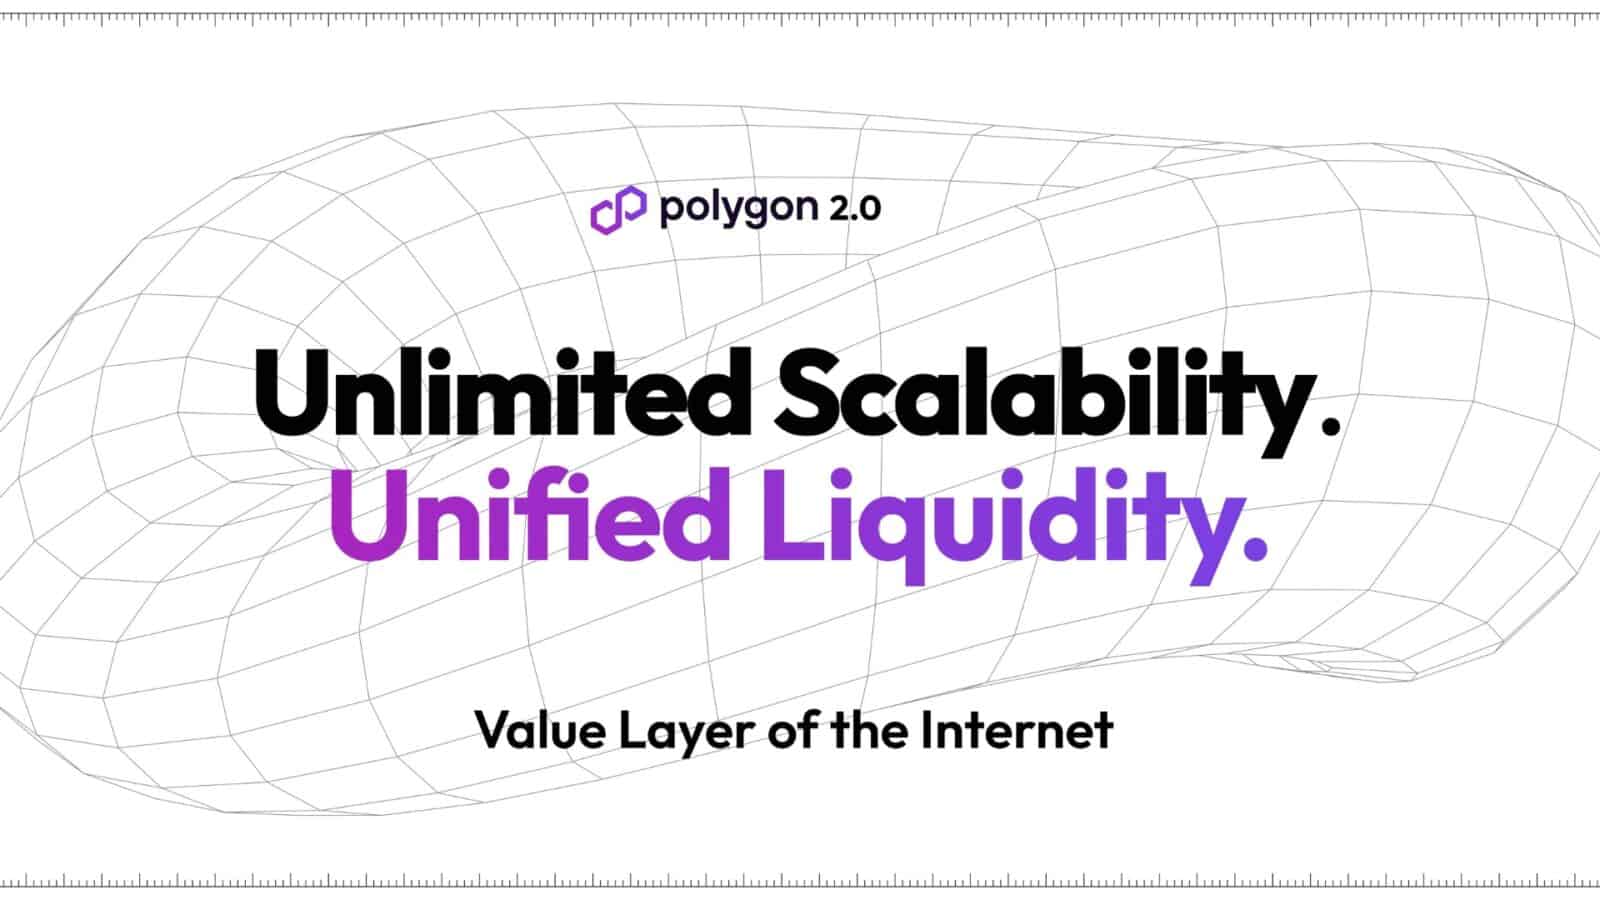 Polygon Launches Ambitious 2.0 Roadmap for Multi-Chain Scalability